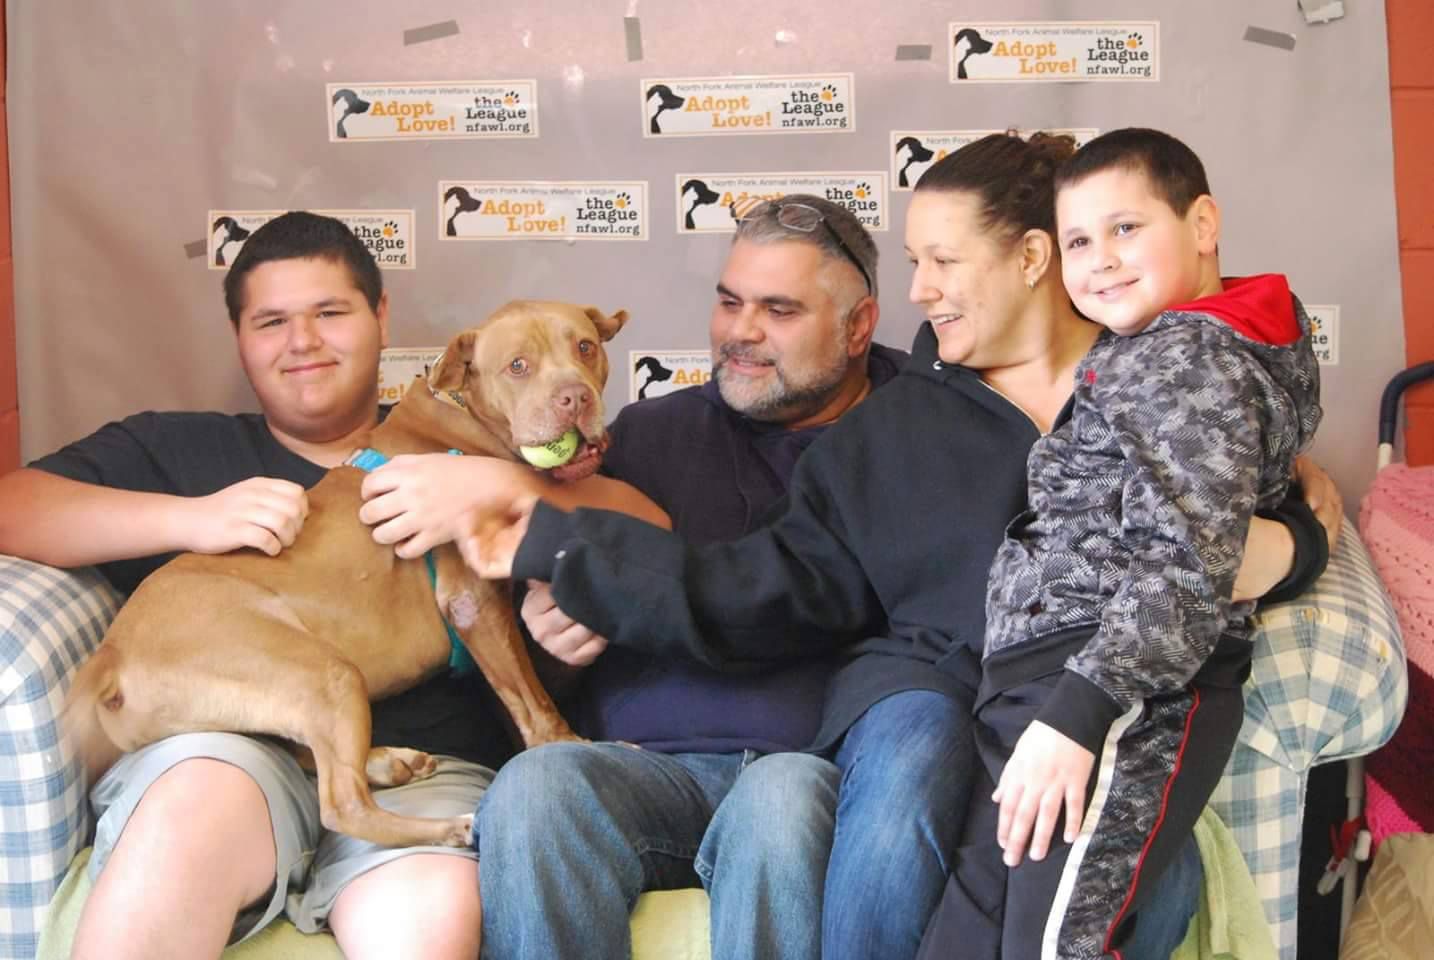 Social Media Gets Chester Adopted After 5 Years in a Shelter